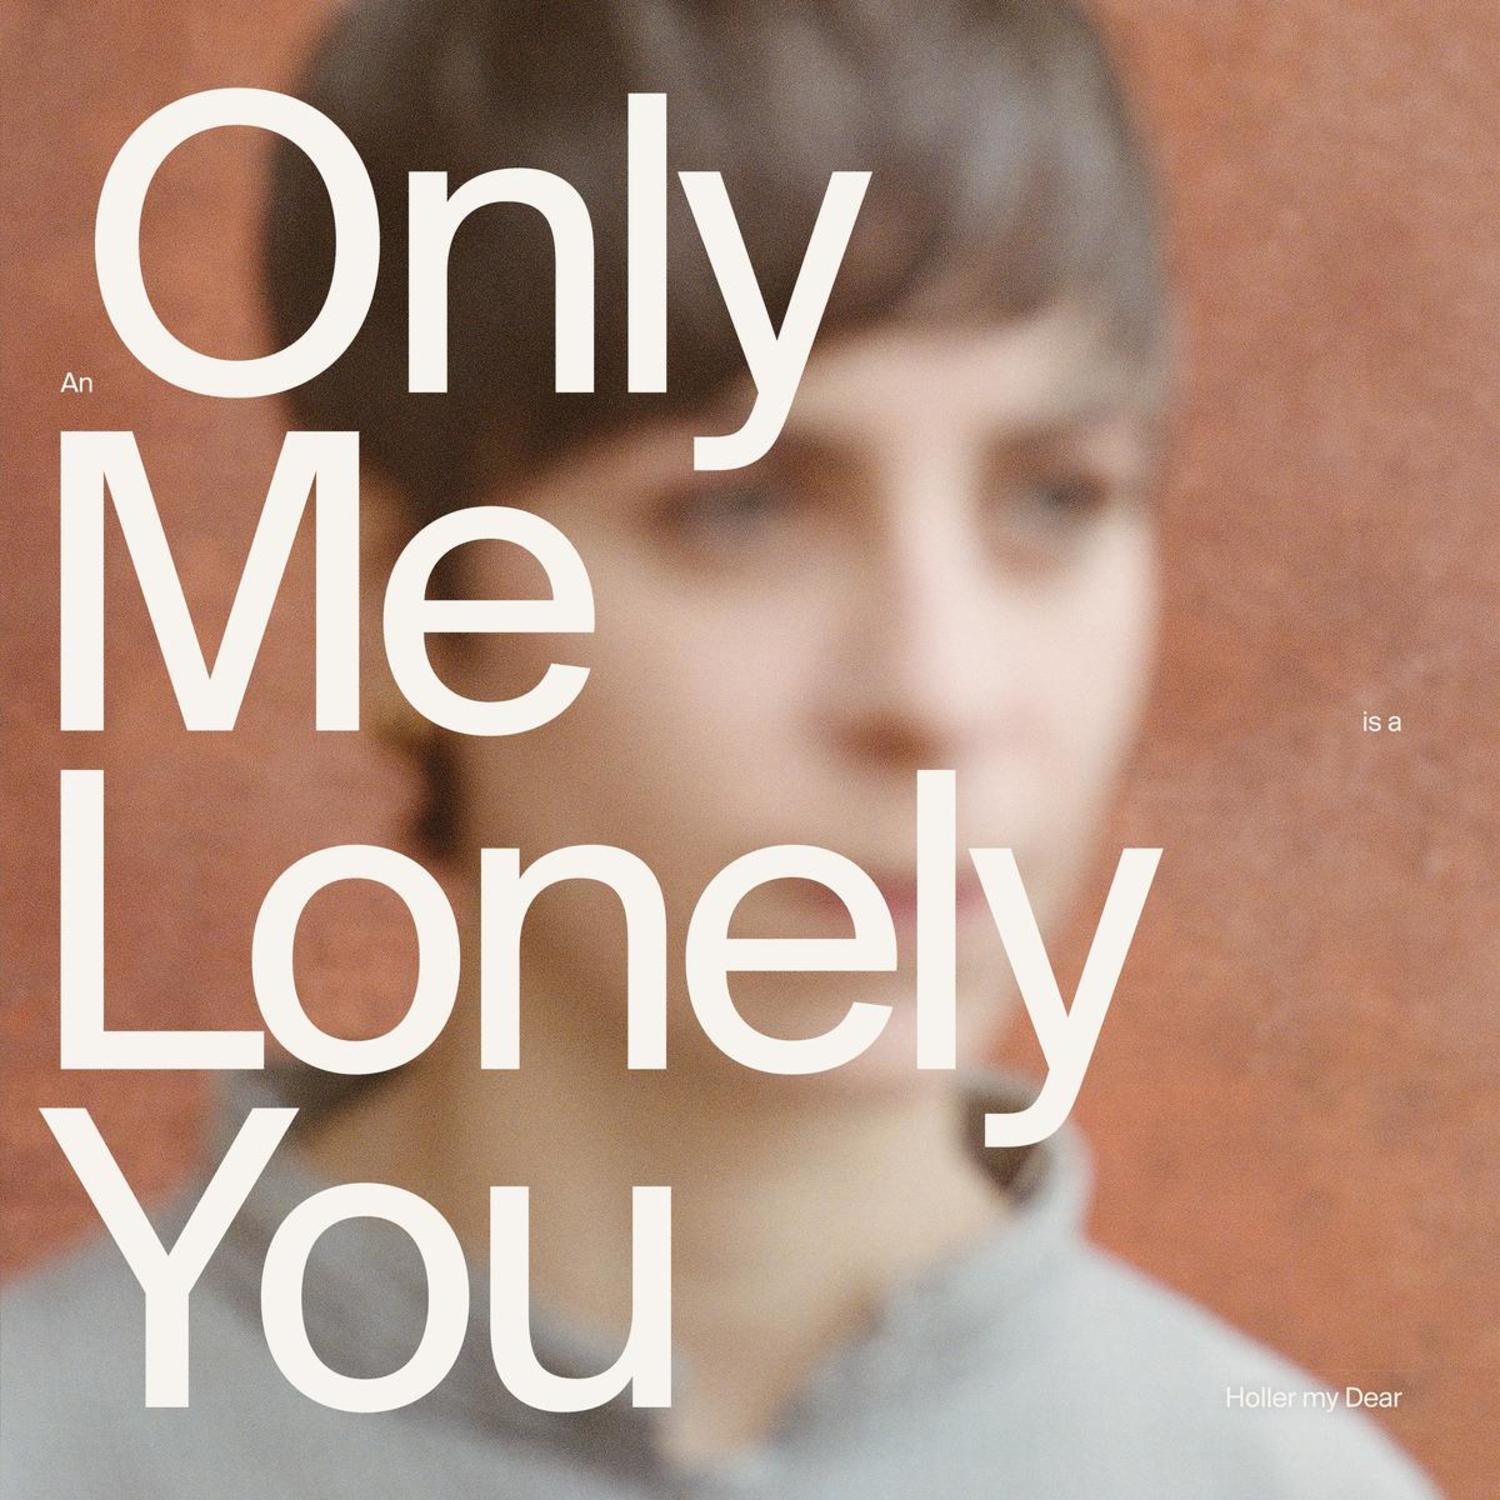 Holler My Dear - AN ONLY ME IS A LONELY YOU 